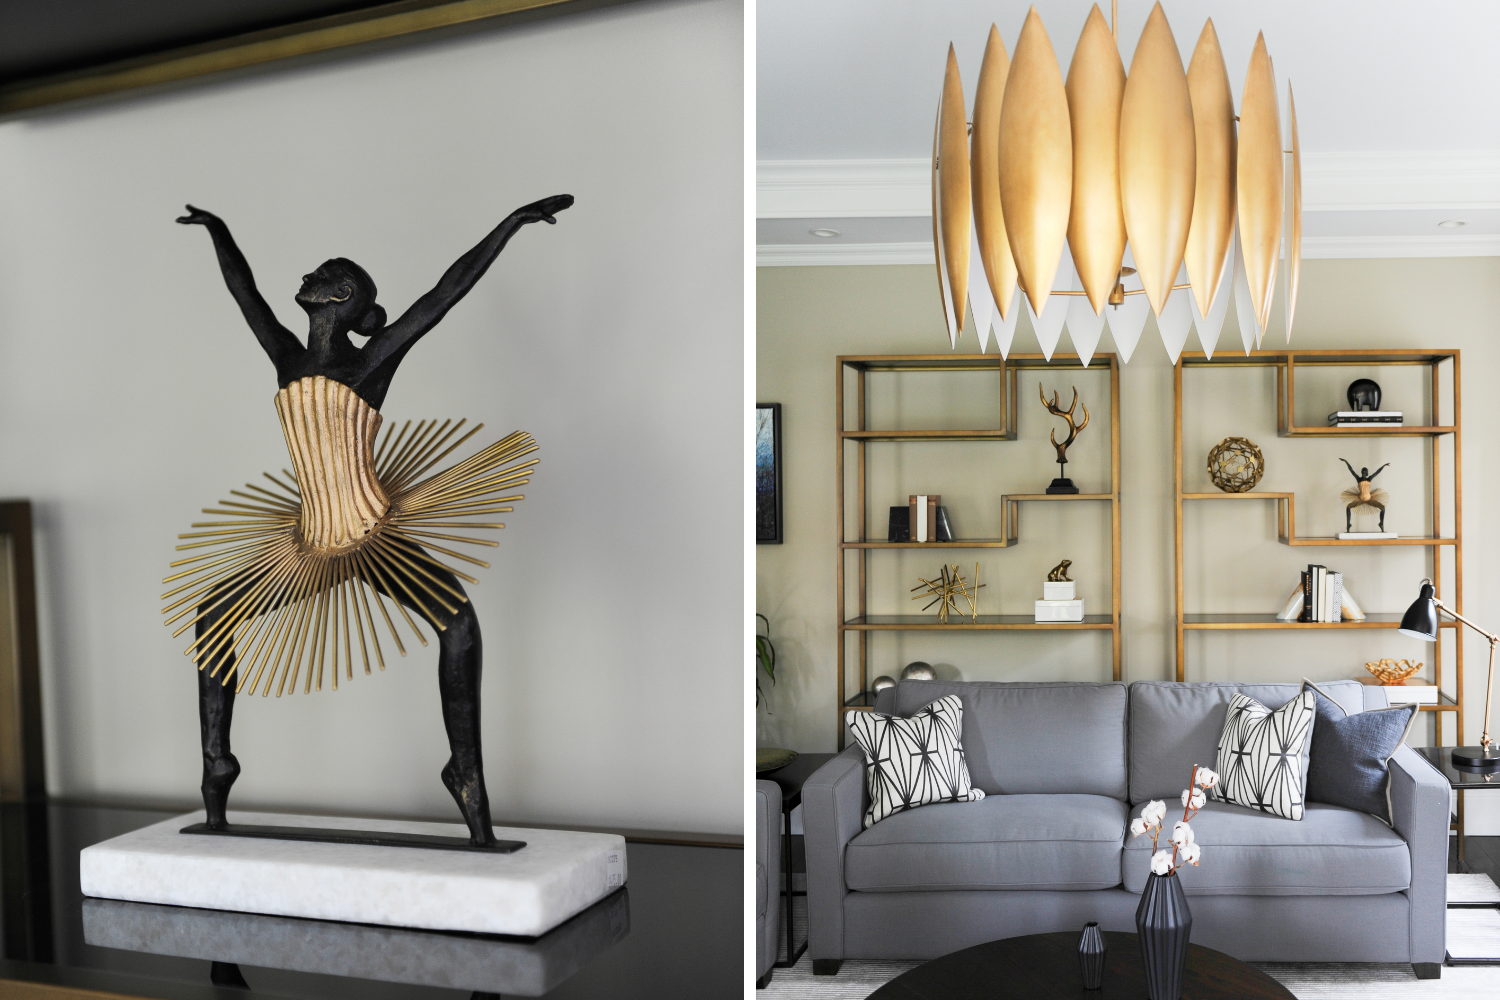 Simply-Home-Decorating-North-Vancouver-Canada-Whimsical-Everyday-Luxury-Interior-Design-Ballerina-Statue-Modern-Chandelier